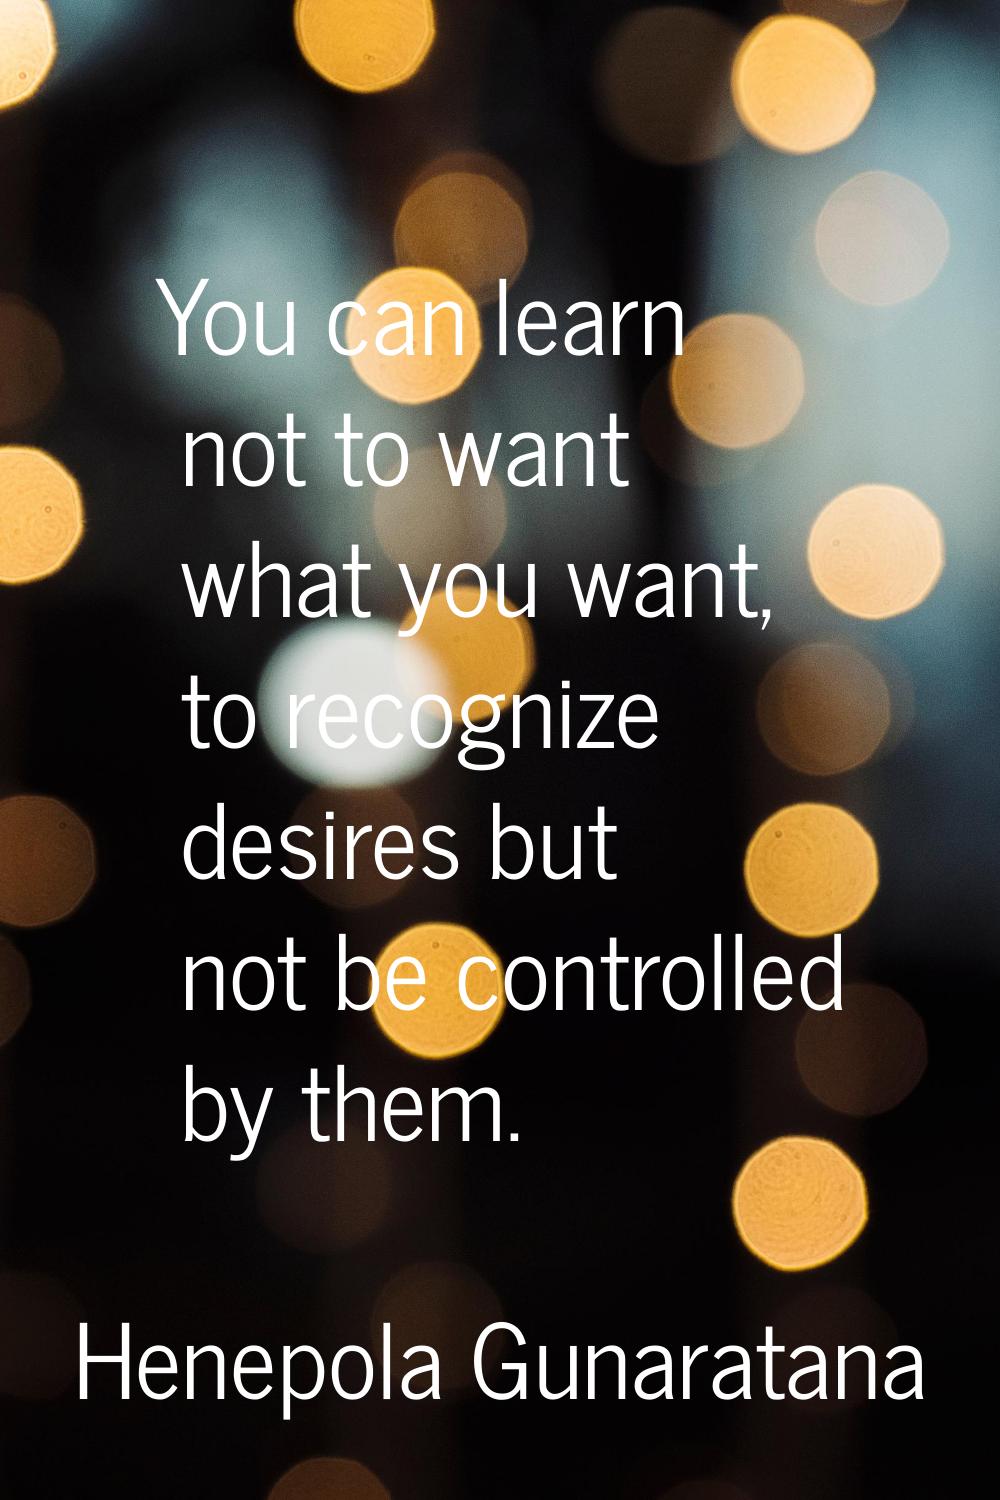 You can learn not to want what you want, to recognize desires but not be controlled by them.